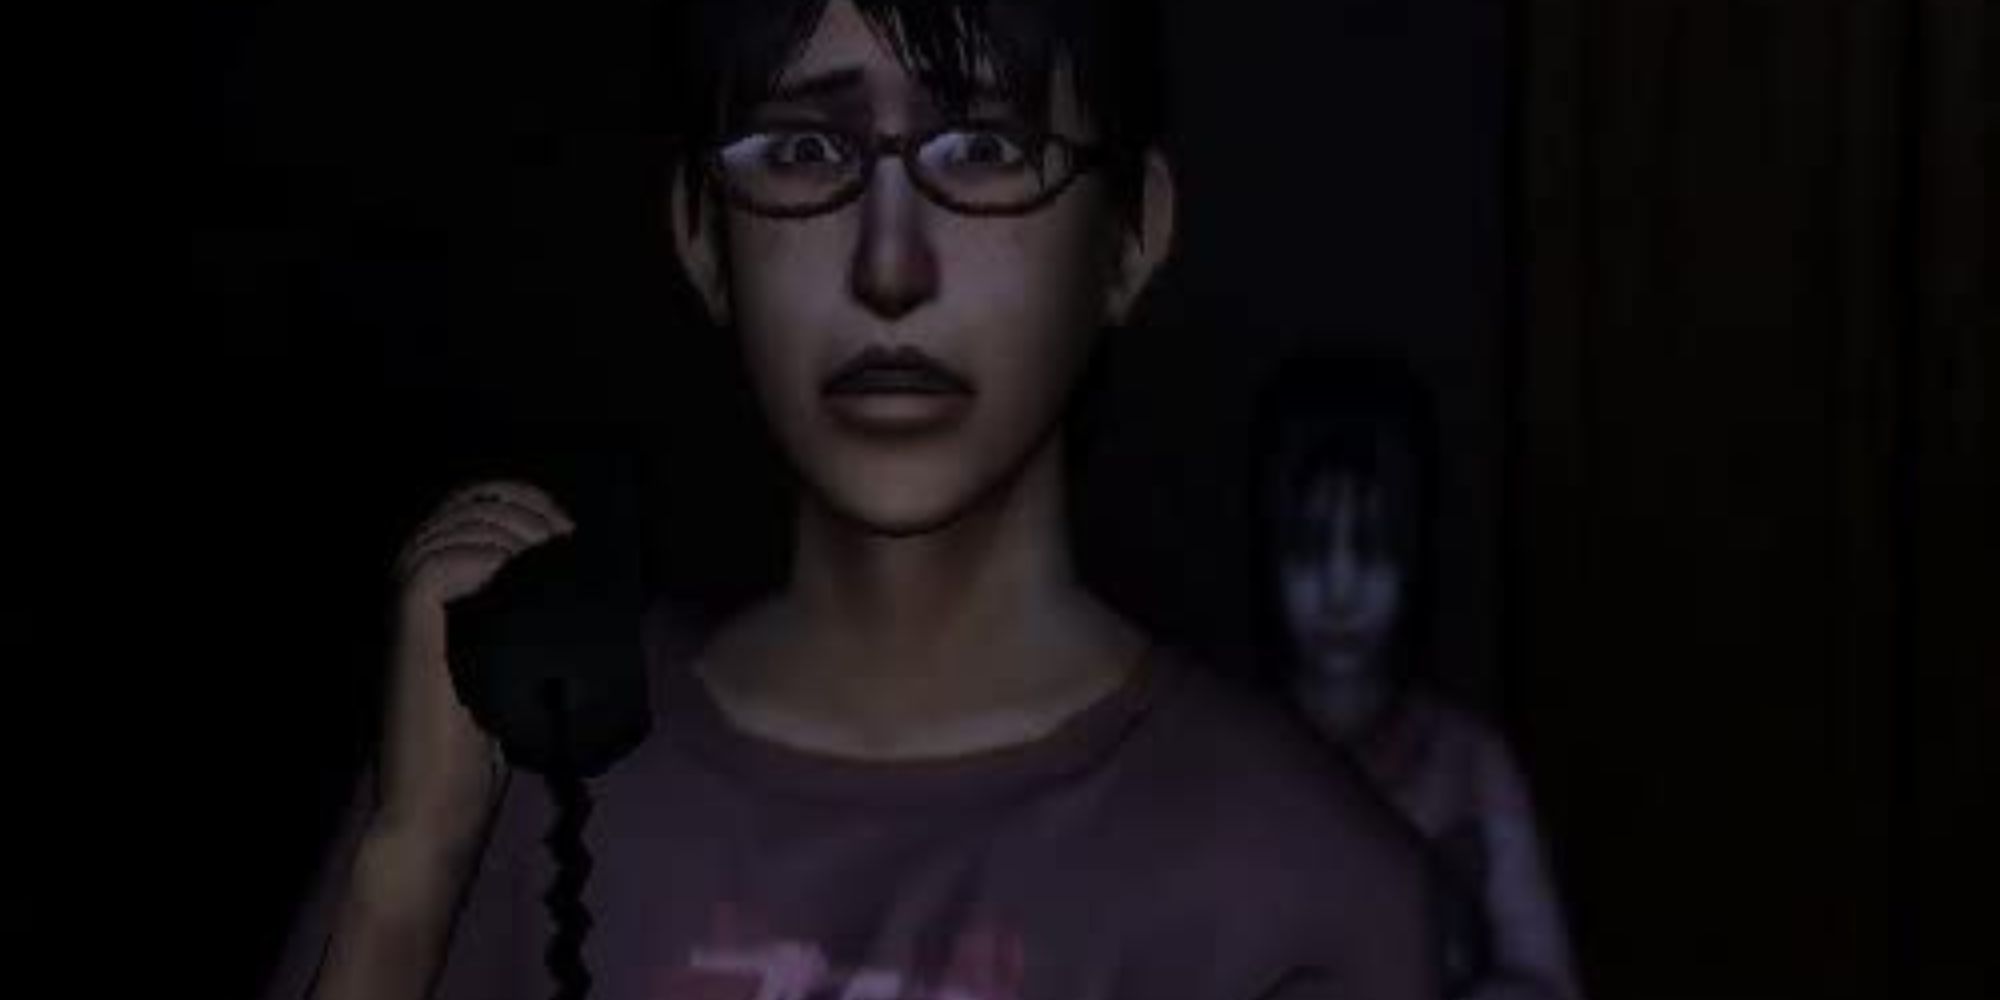 A boy with glasses holding a phone looks frightened as a ghost stands behind him in calling